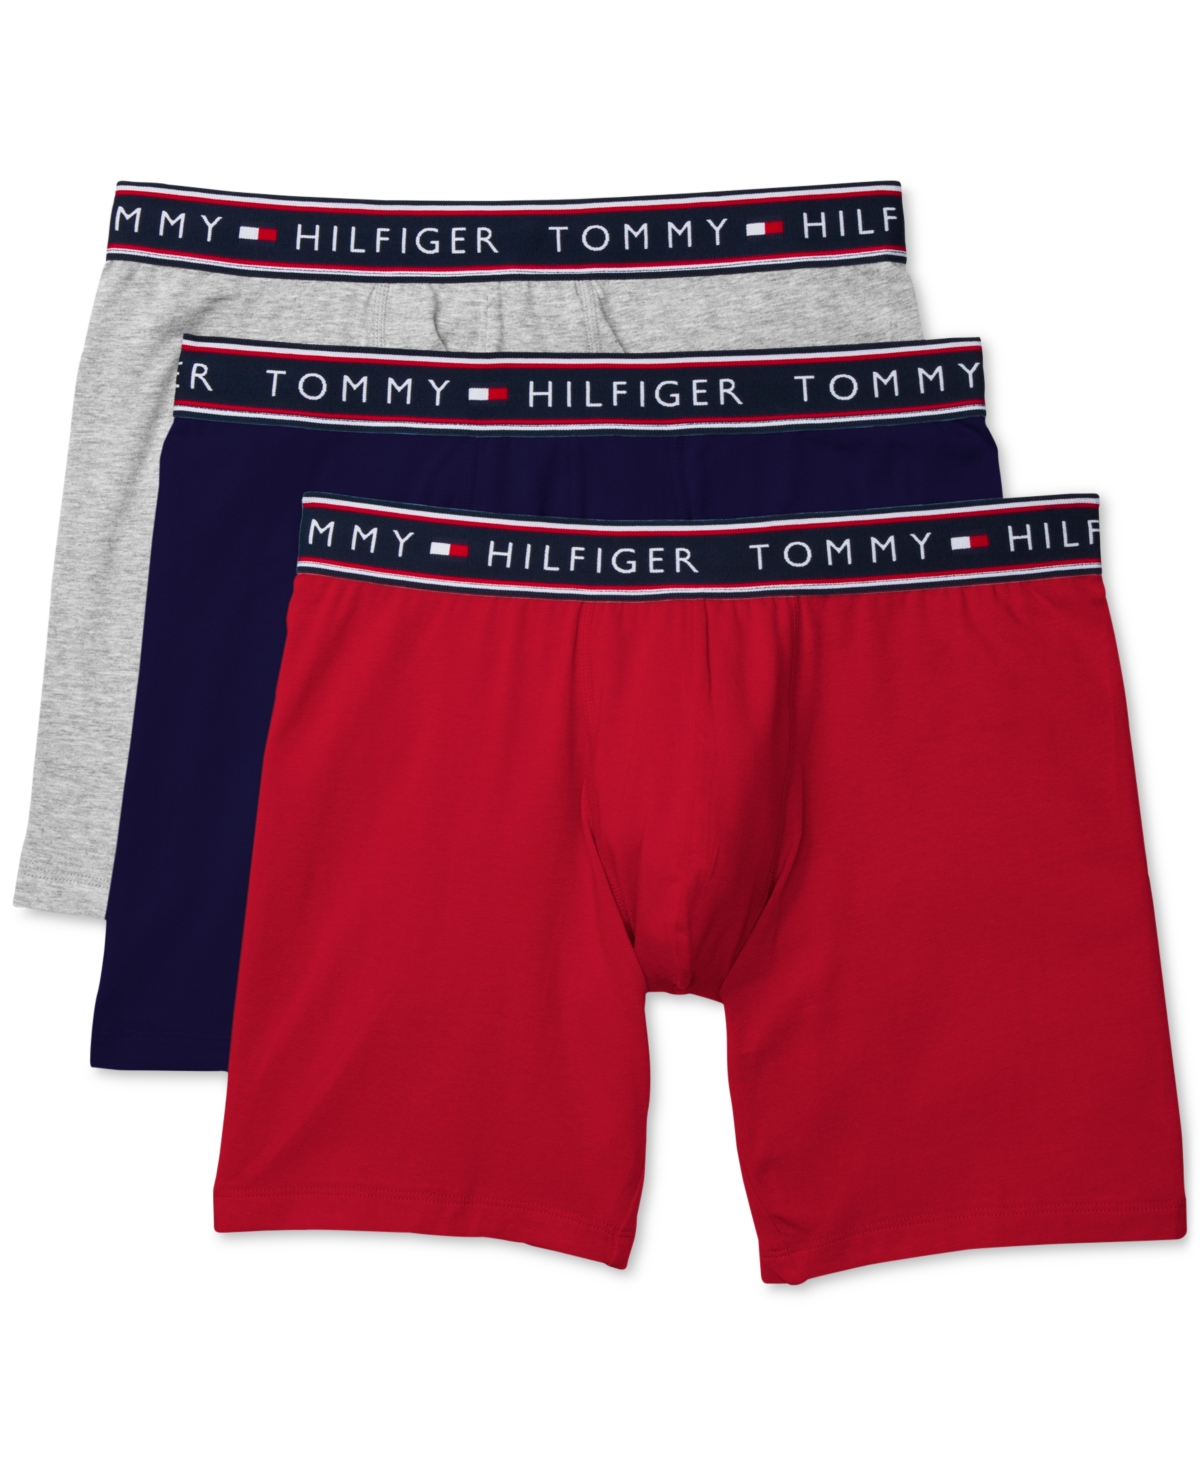 UPC 088541539388 product image for Tommy Hilfiger Men's Cotton Stretch Boxer Brief, 3 Pack | upcitemdb.com